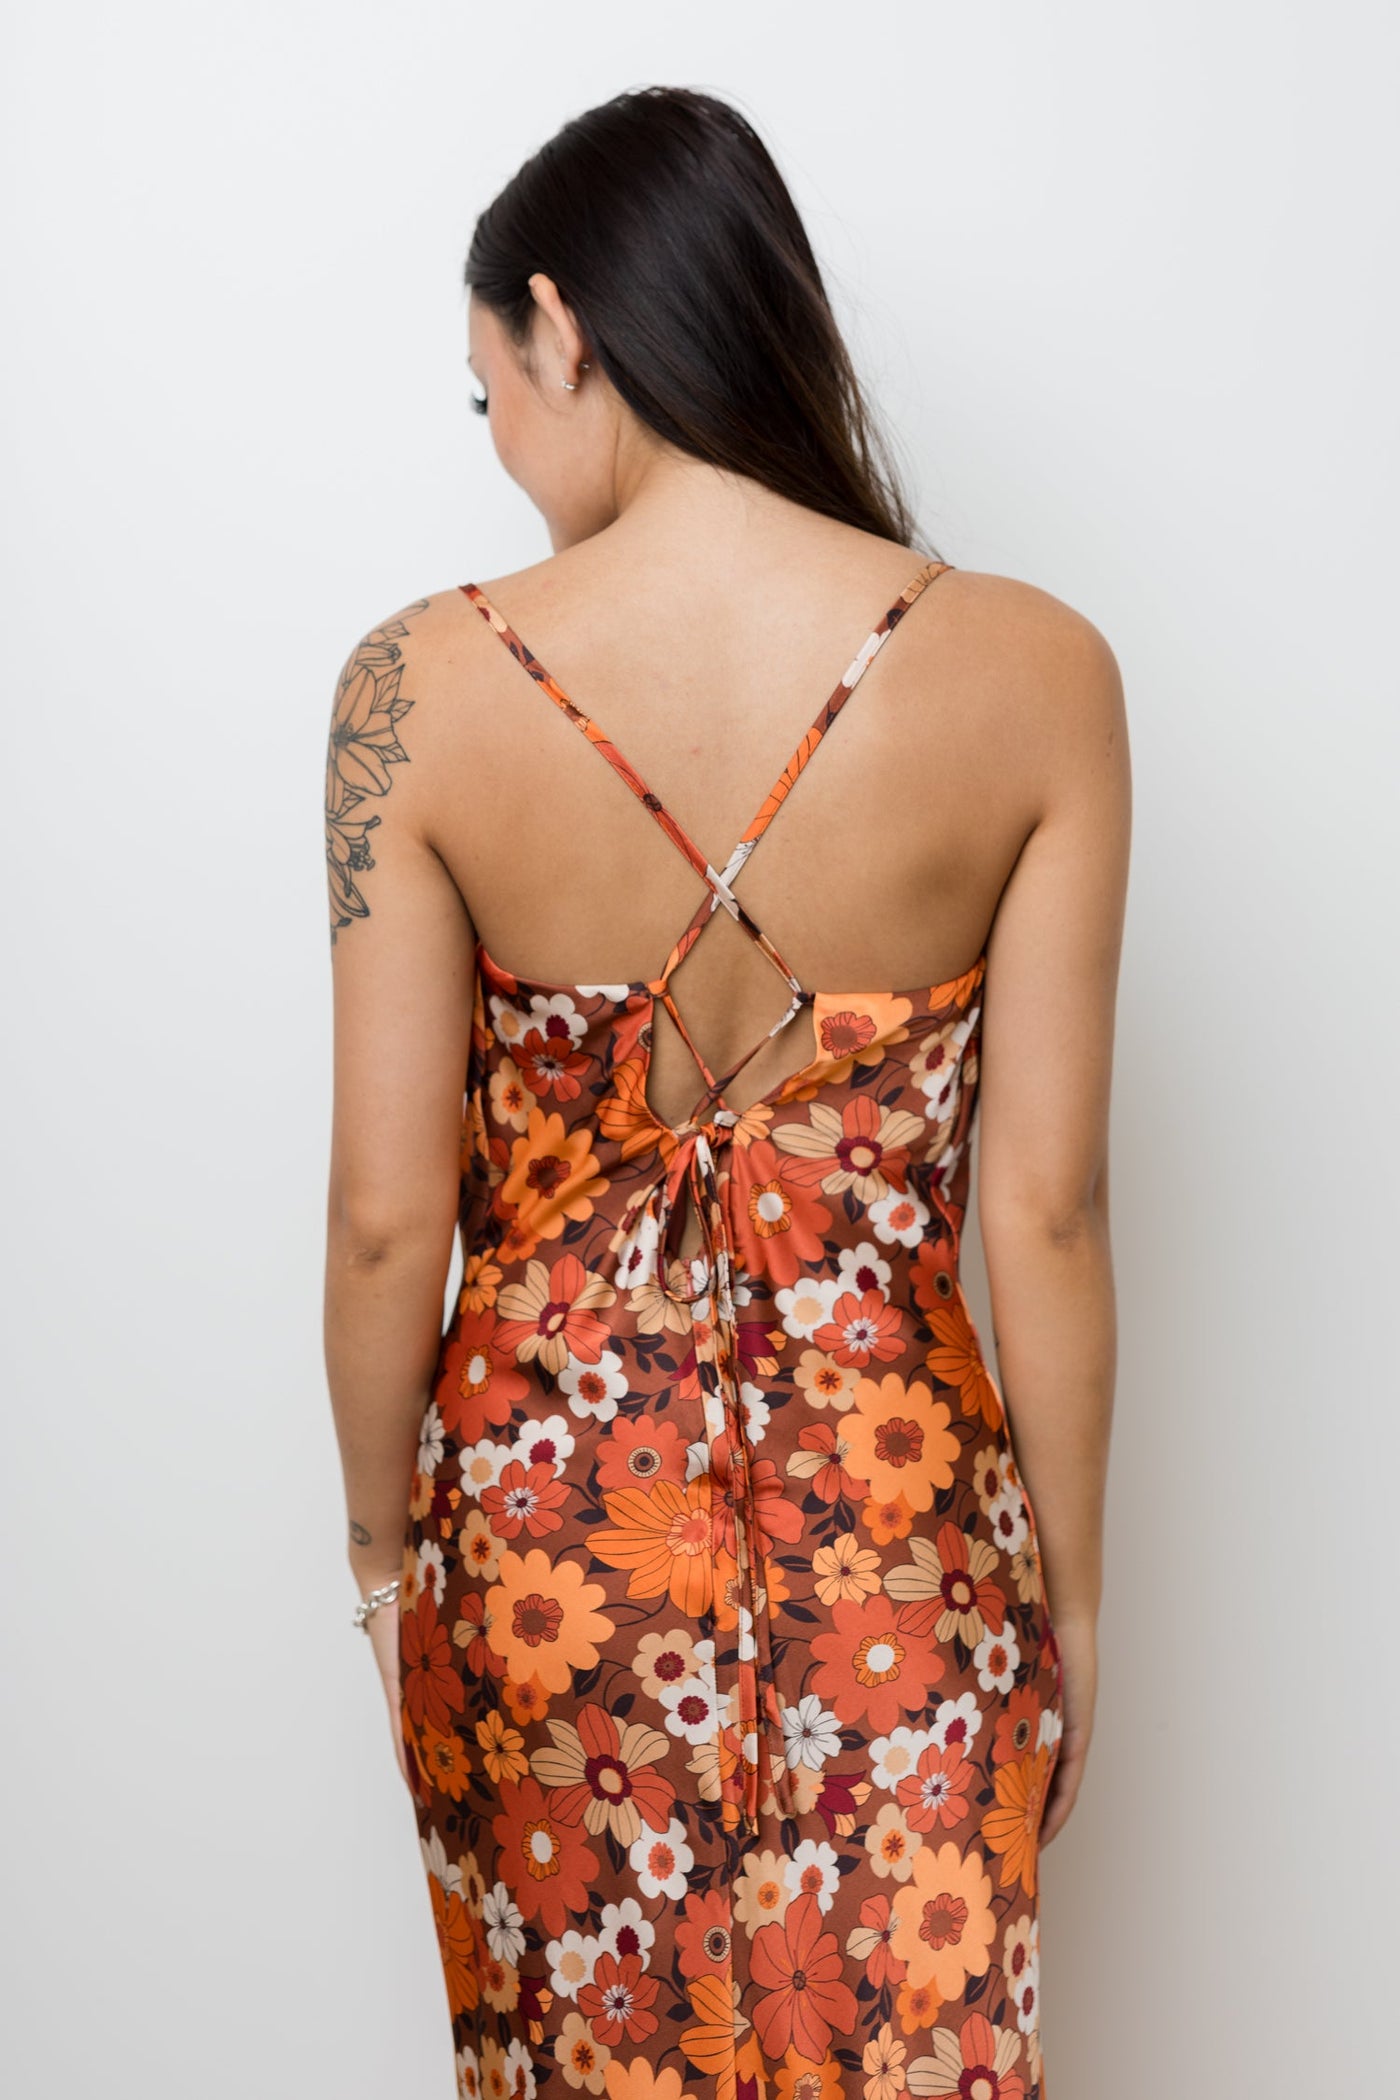 The Groovy Baby Rust Floral Satin Maxi Dress